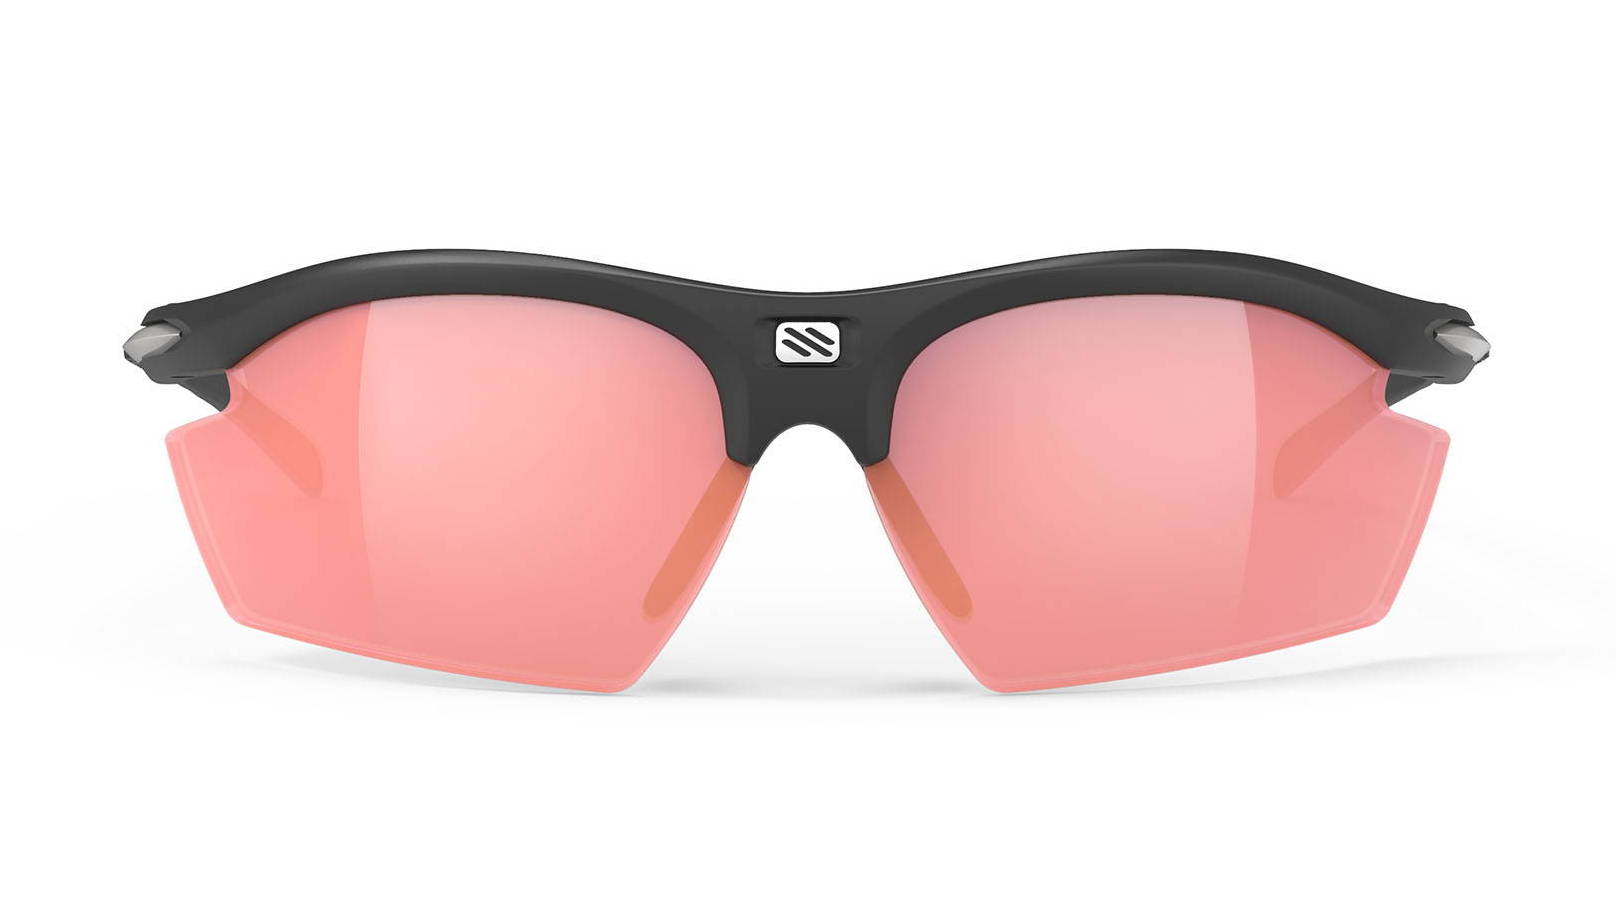 Sport Sunglasses Buyer's Guide, How-to Guide